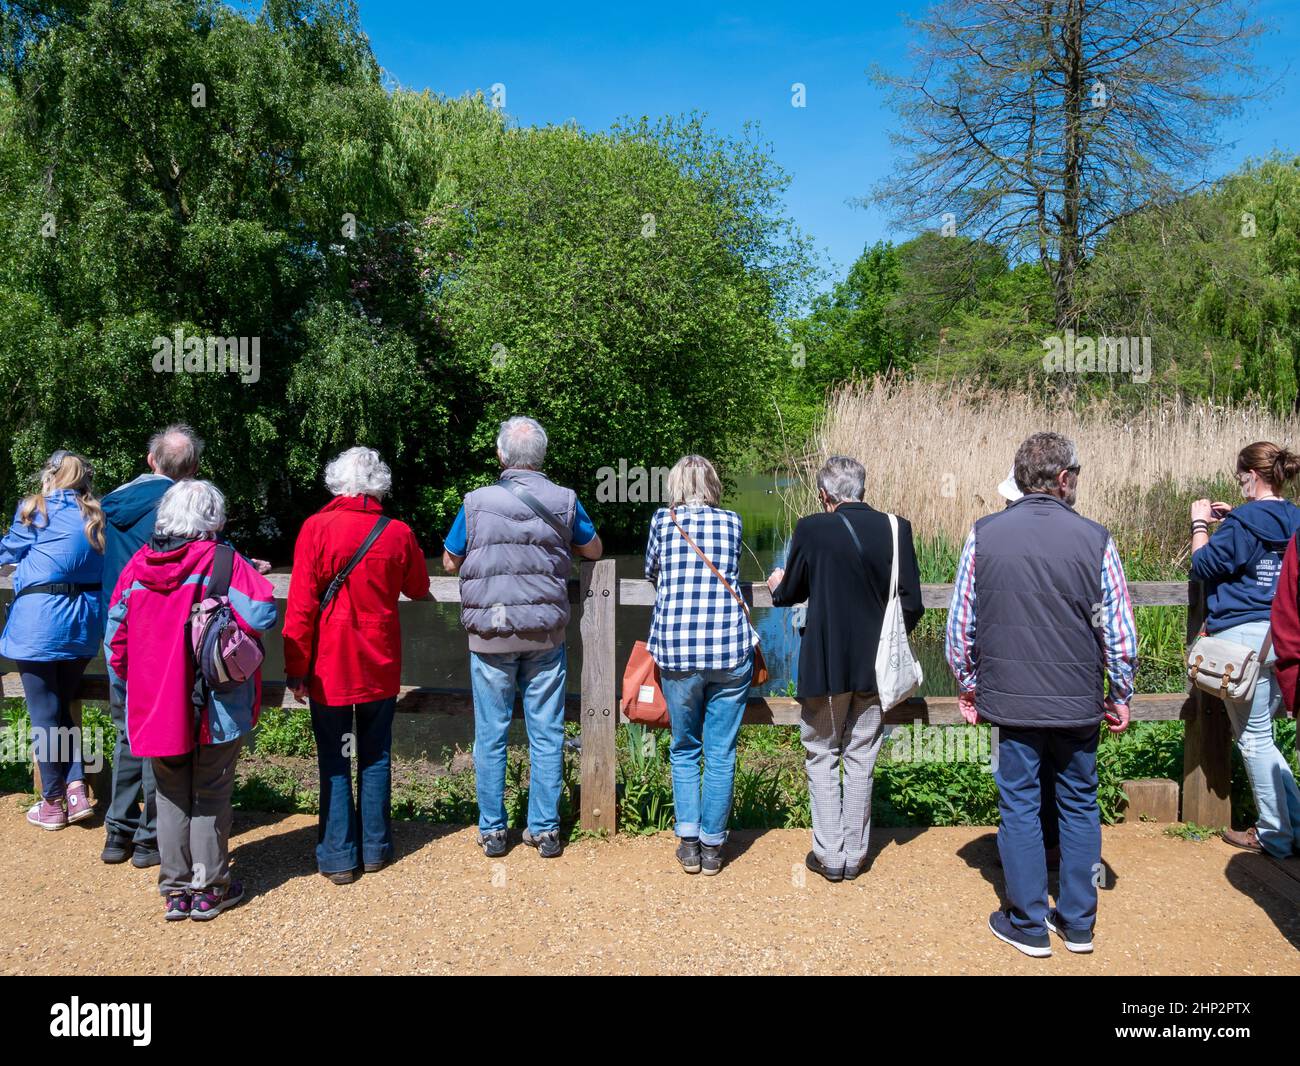 London, England, United Kingdom - May 13, 2019: Tourists watching the beautiful blooming nature in Isabella Plantation in the spring season Stock Photo